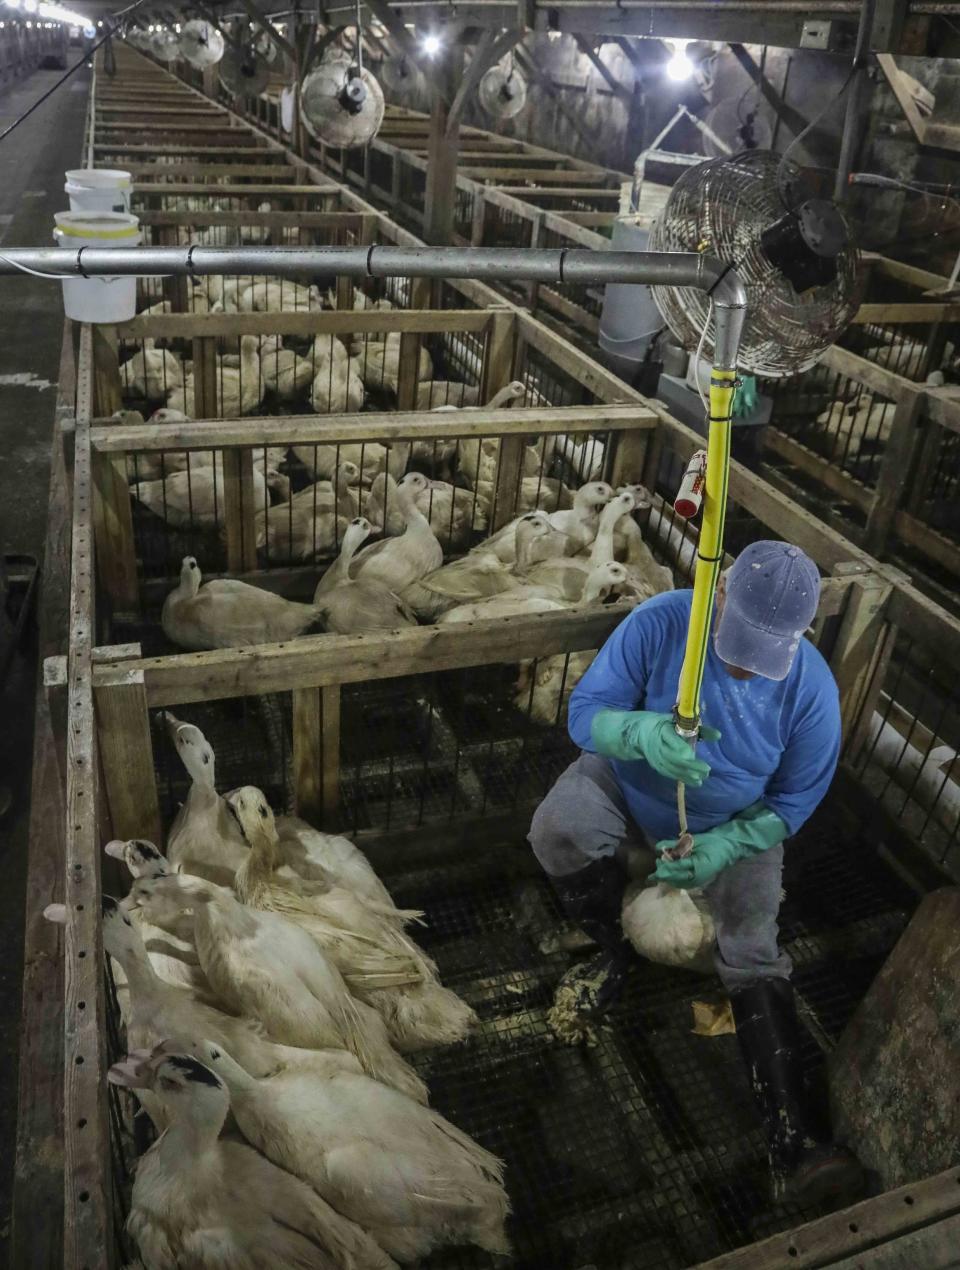 CORRECTS TO HUDSON VALLEY FOIE GRAS INSTEAD OF HIDDEN VALLEY FOIE GRAS In this Thursday July 18, 2019 photo, Moulard ducks, a hybrid white farm Peking duck and a South American Muscovy duck are caged and force-fed between 12-15 weeks old at Hudson Valley Foie Gras duck farm in Ferndale, N.Y. A New York City proposal to ban the sale of foie gras, the fattened liver of a duck or goose, has the backing of animal welfare advocates, but could mean trouble for farms outside the city that are the premier U.S. producers of the French delicacy. (AP Photo/Bebeto Matthews)